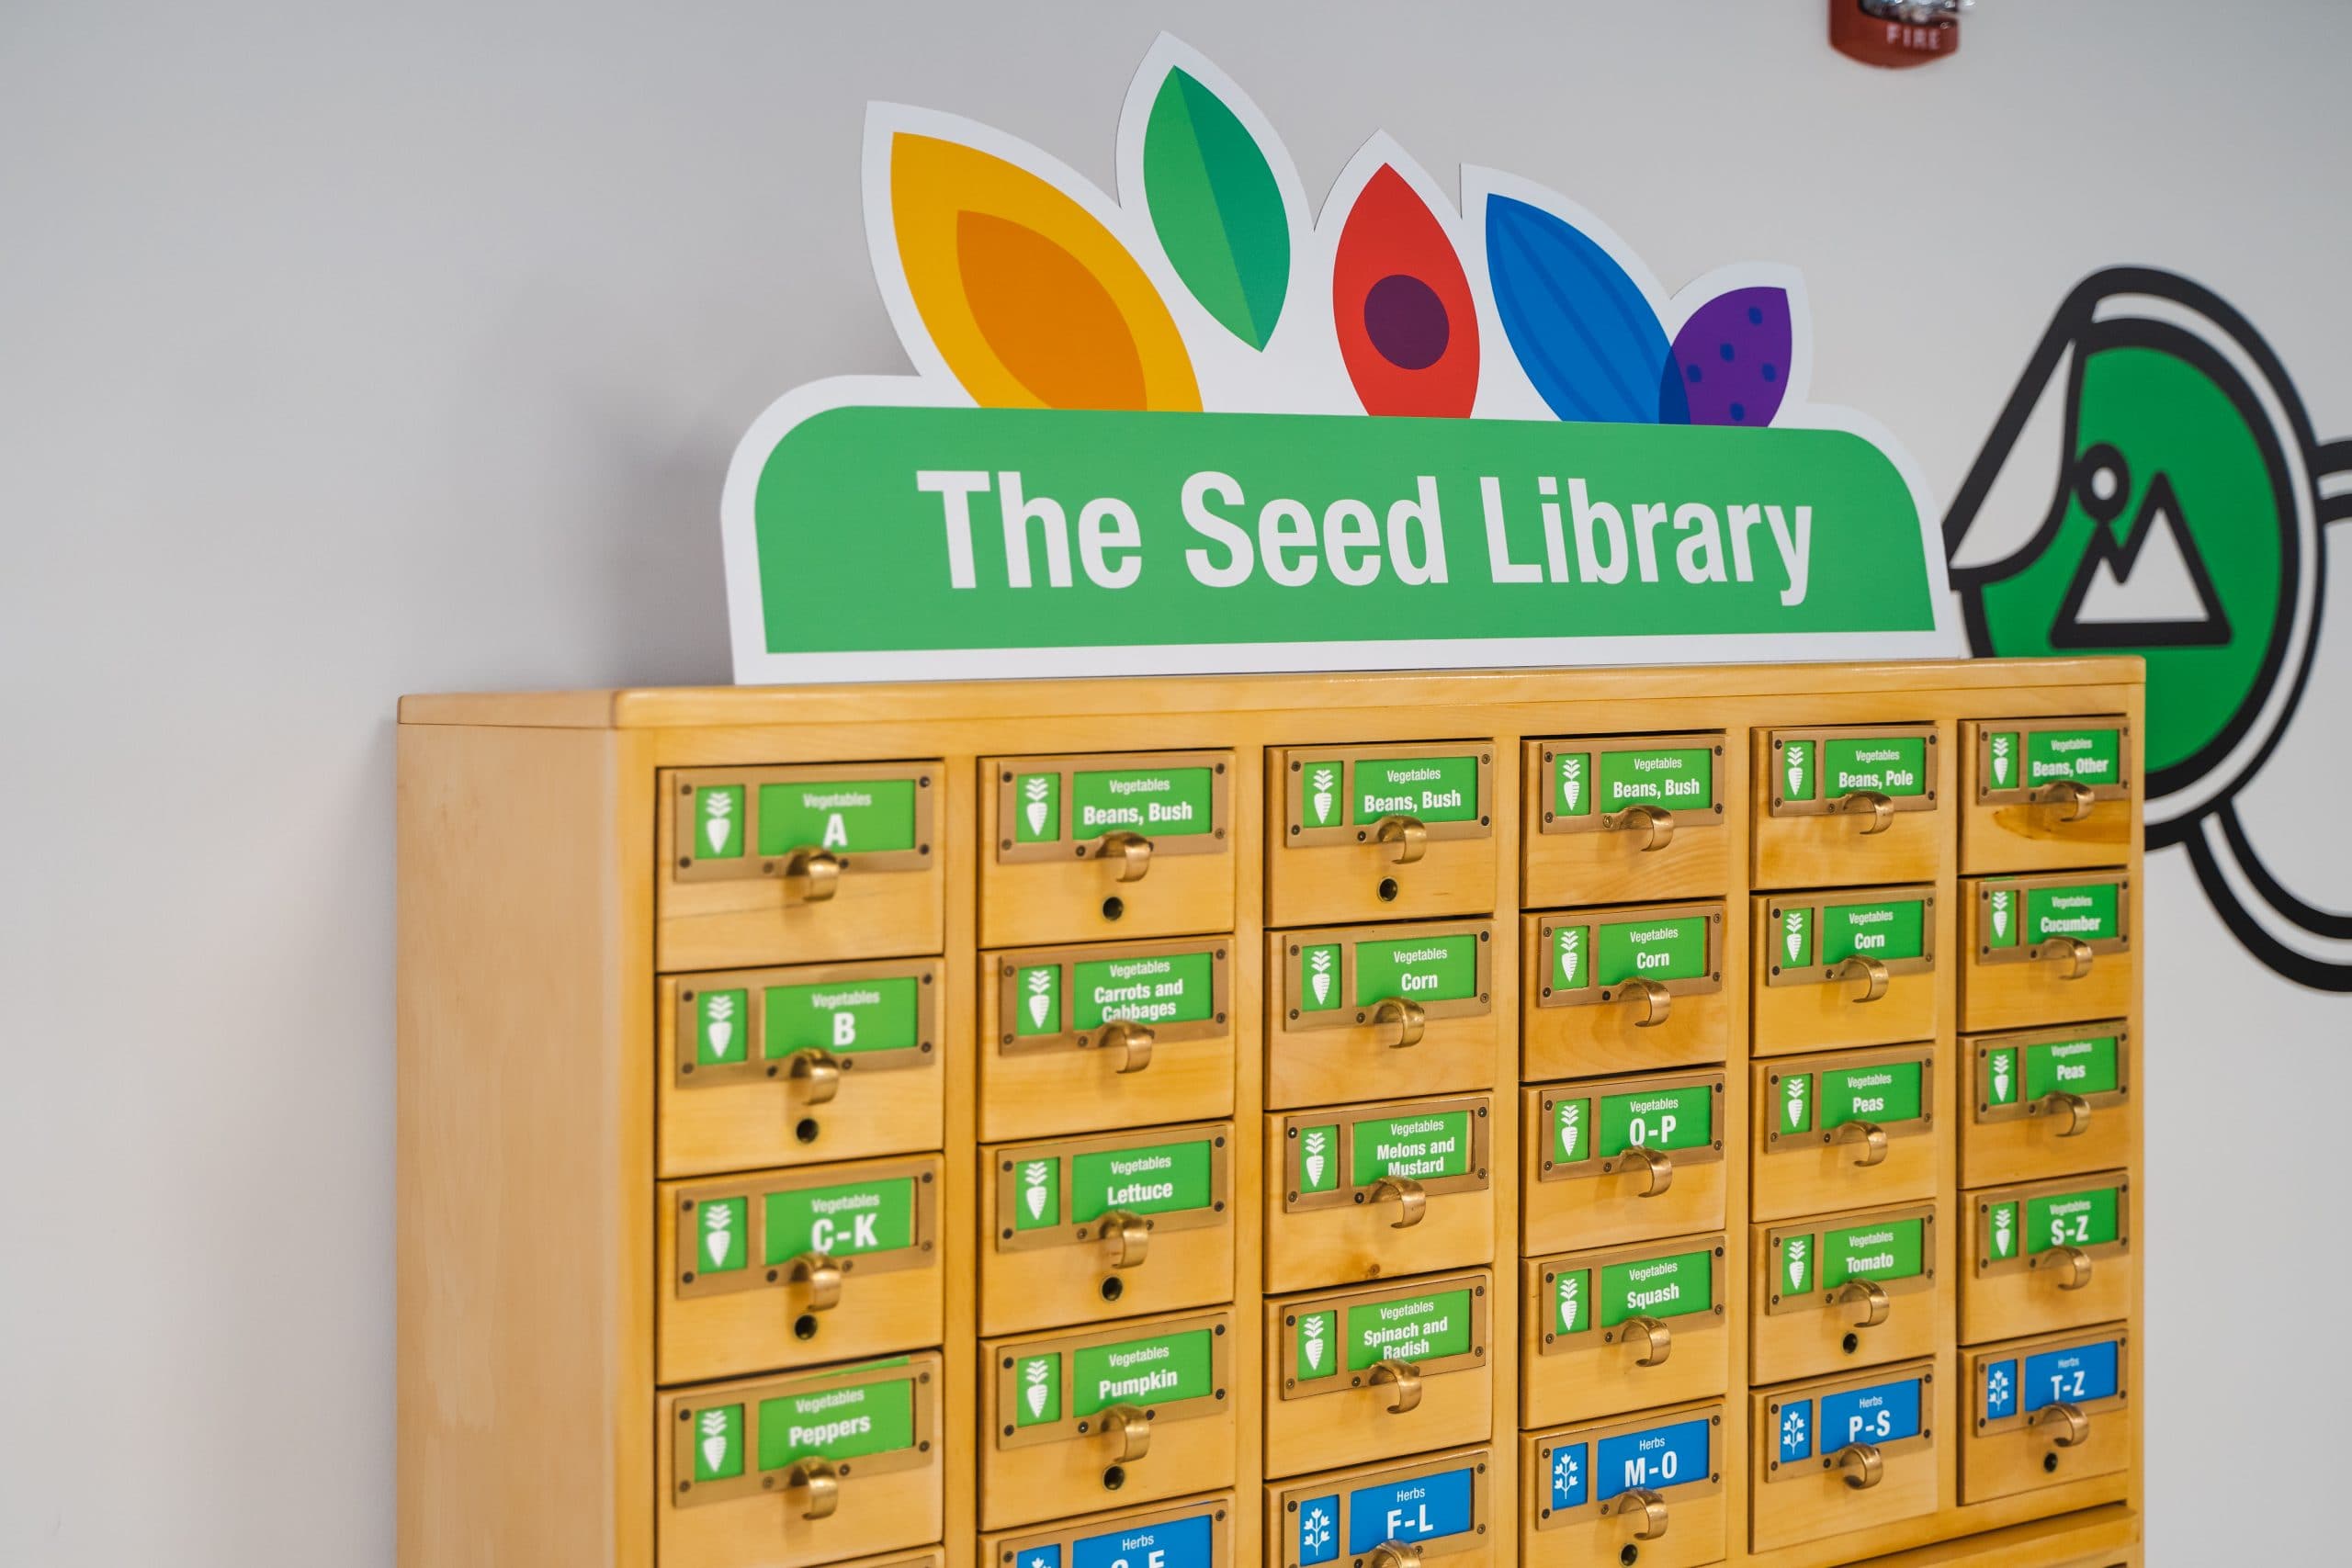 Photo of The Seed Library which is housed in an old card catalogue